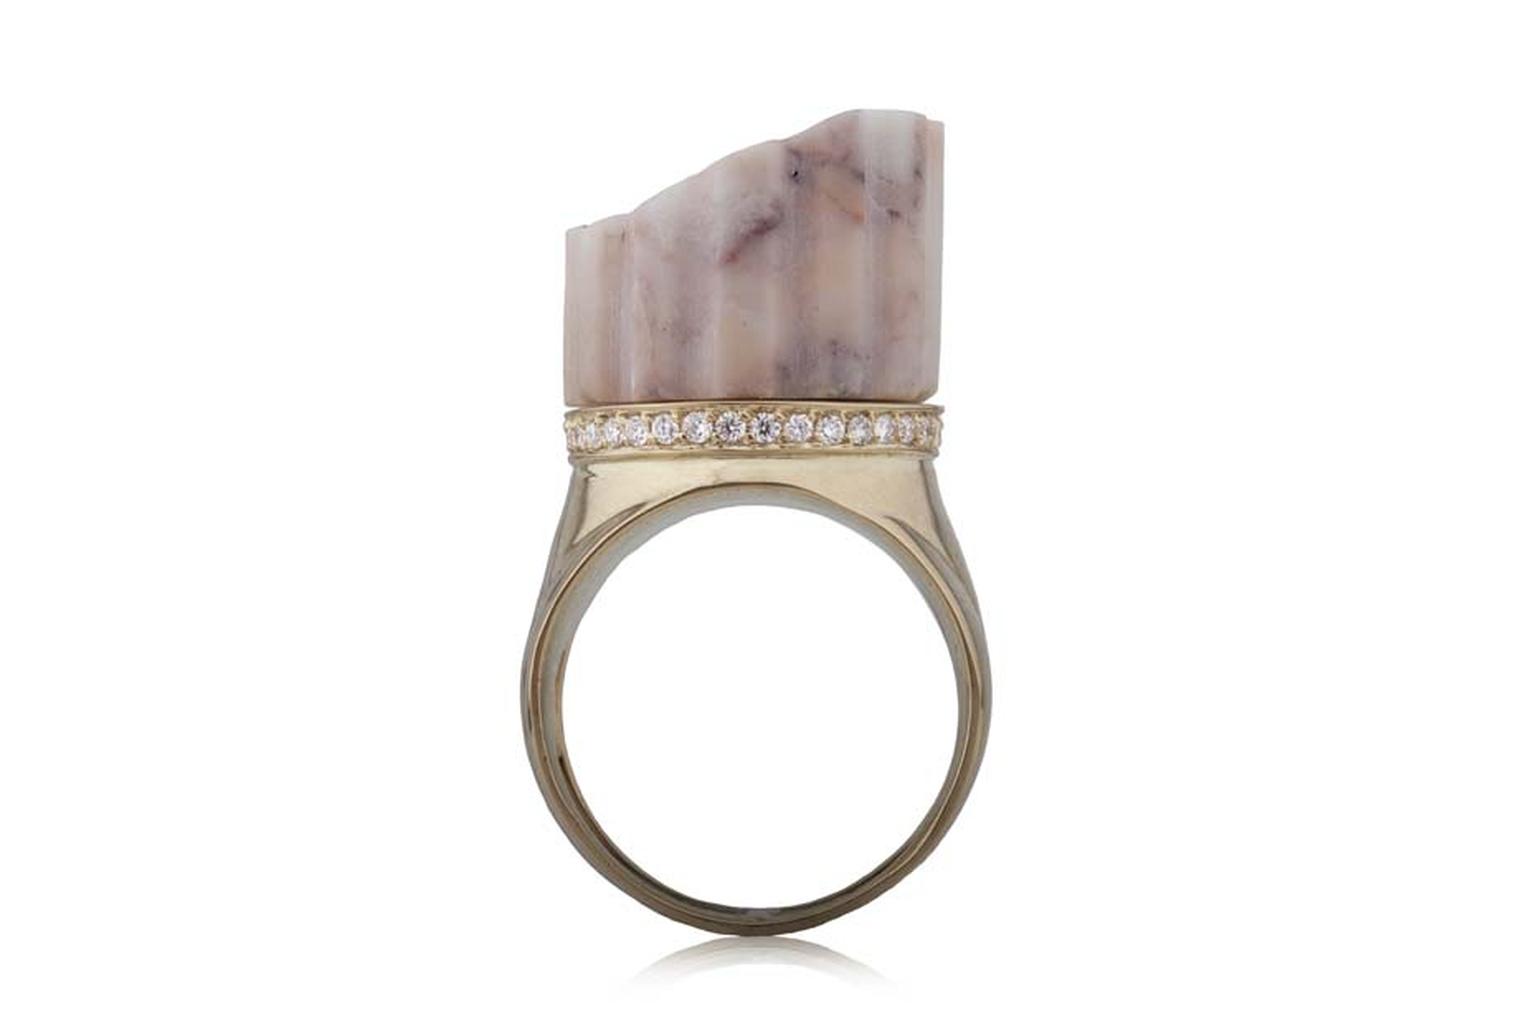 Maiyet gold geometric cage bangle featuring rose cut champagne diamonds, available at Latest Revival (4.88ct).